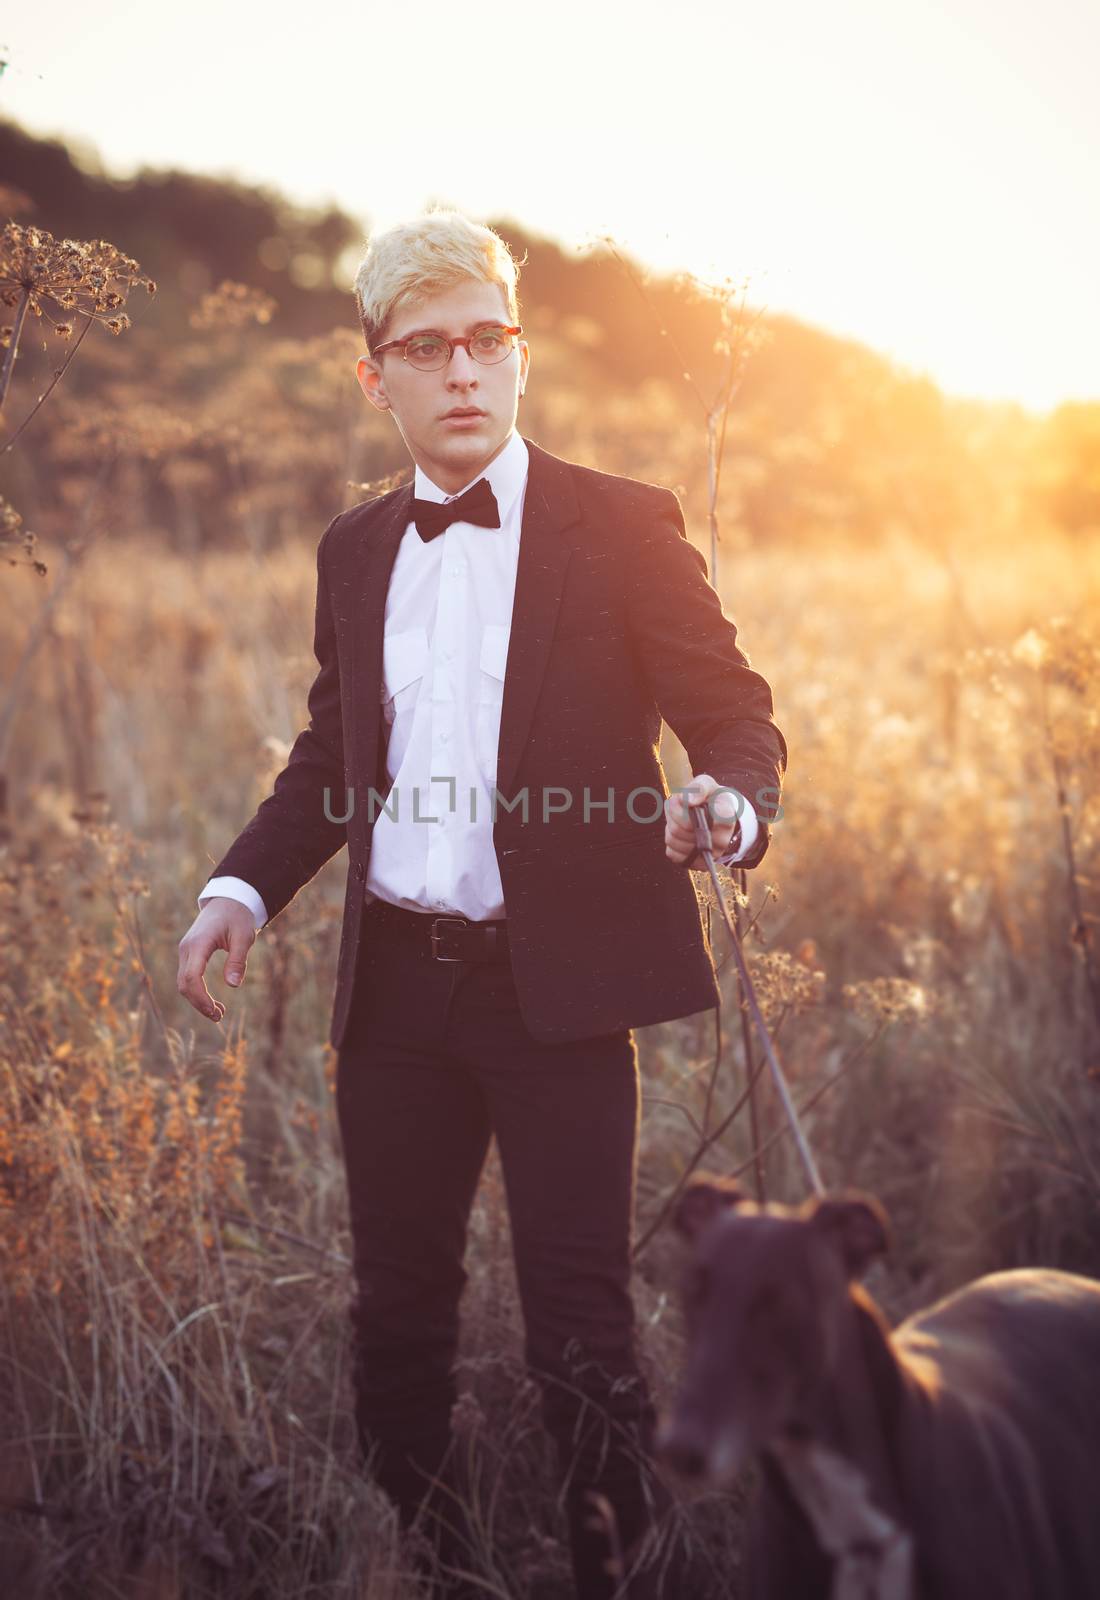 Young attractive man in suit and tie with a greyhound dog in aut by vlad_star